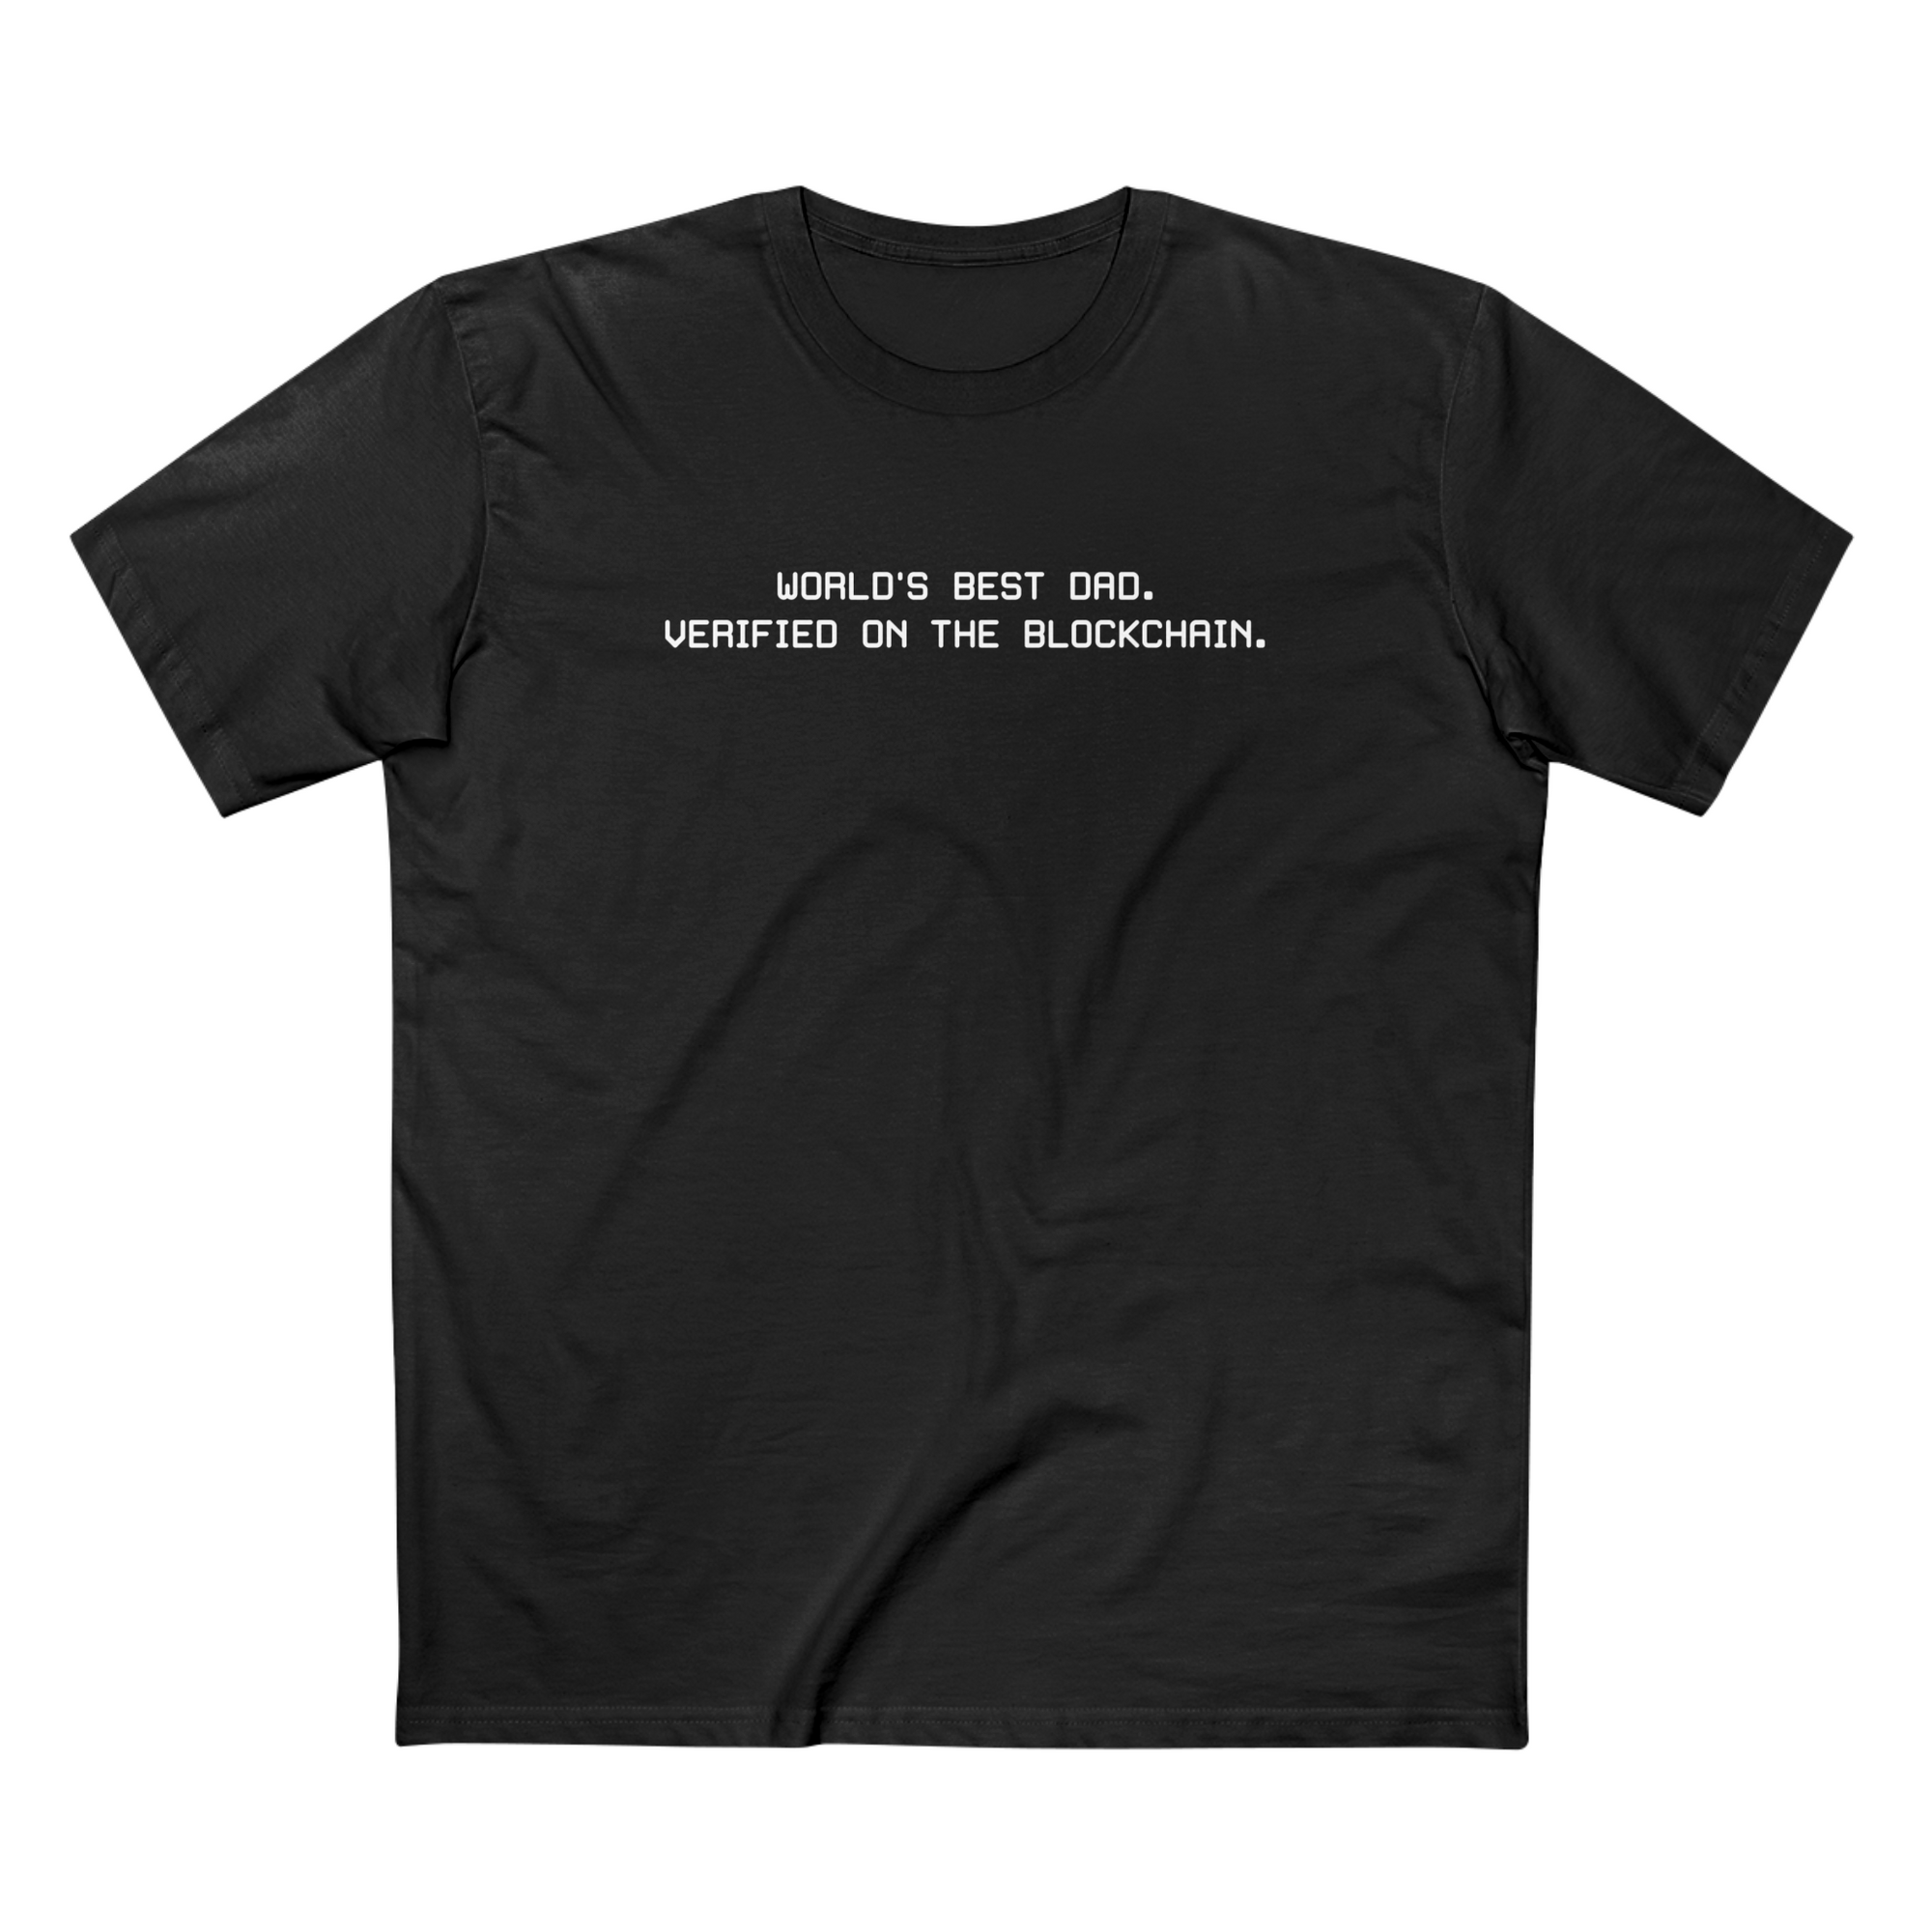 Crypto Shirt - World's Best Dad - Verified On The Block Chain T-Shirt. Available from NEONCRYPTO STORE.